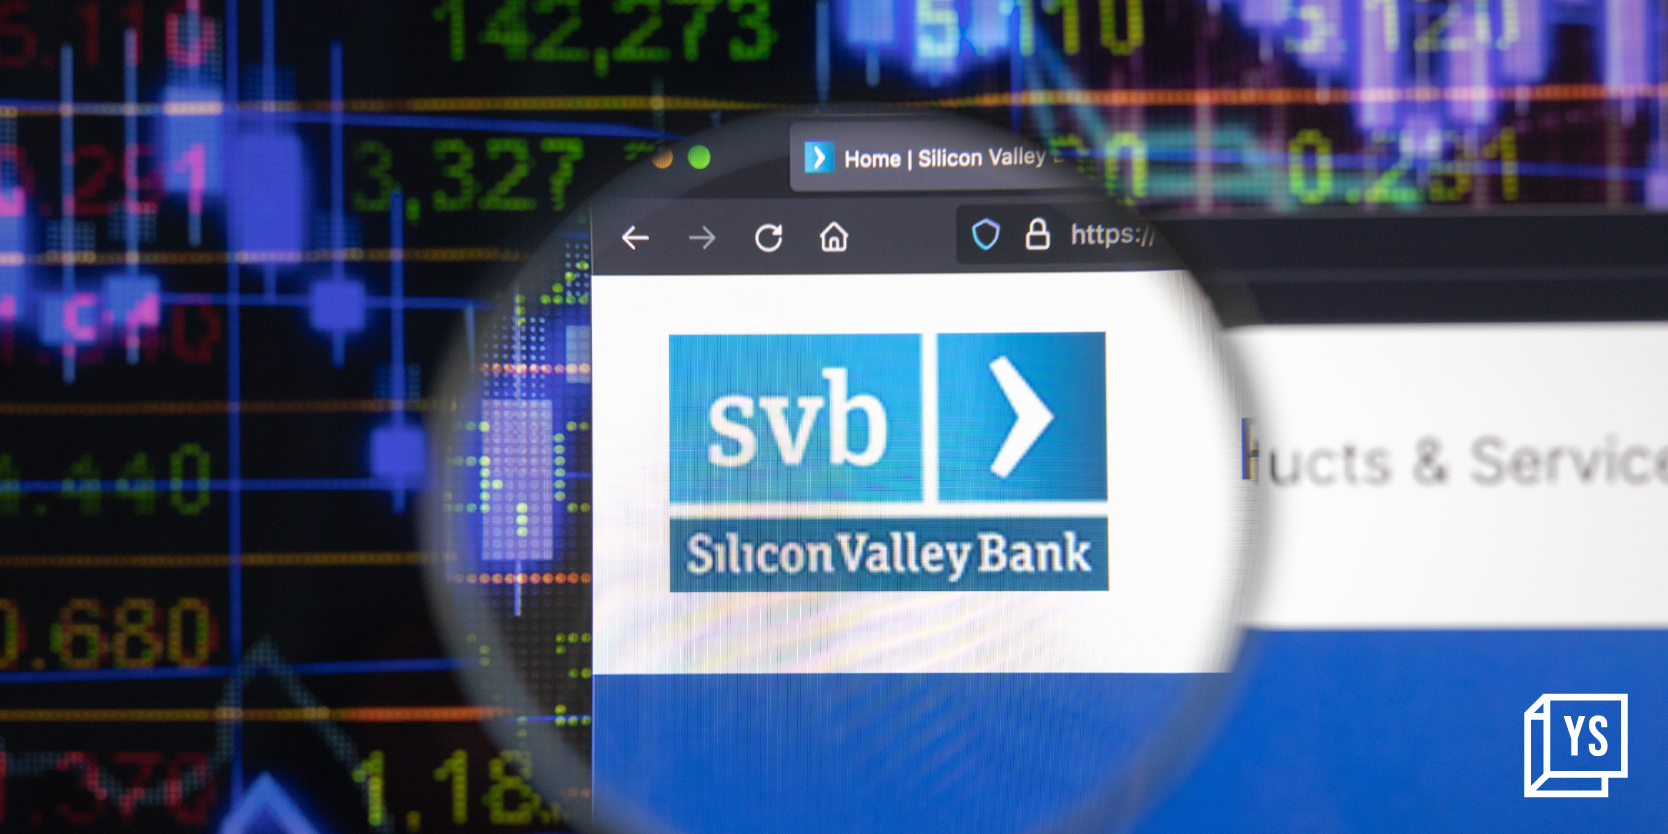 American VCs willing to support Silicon Valley Bank in the event of capitalisation